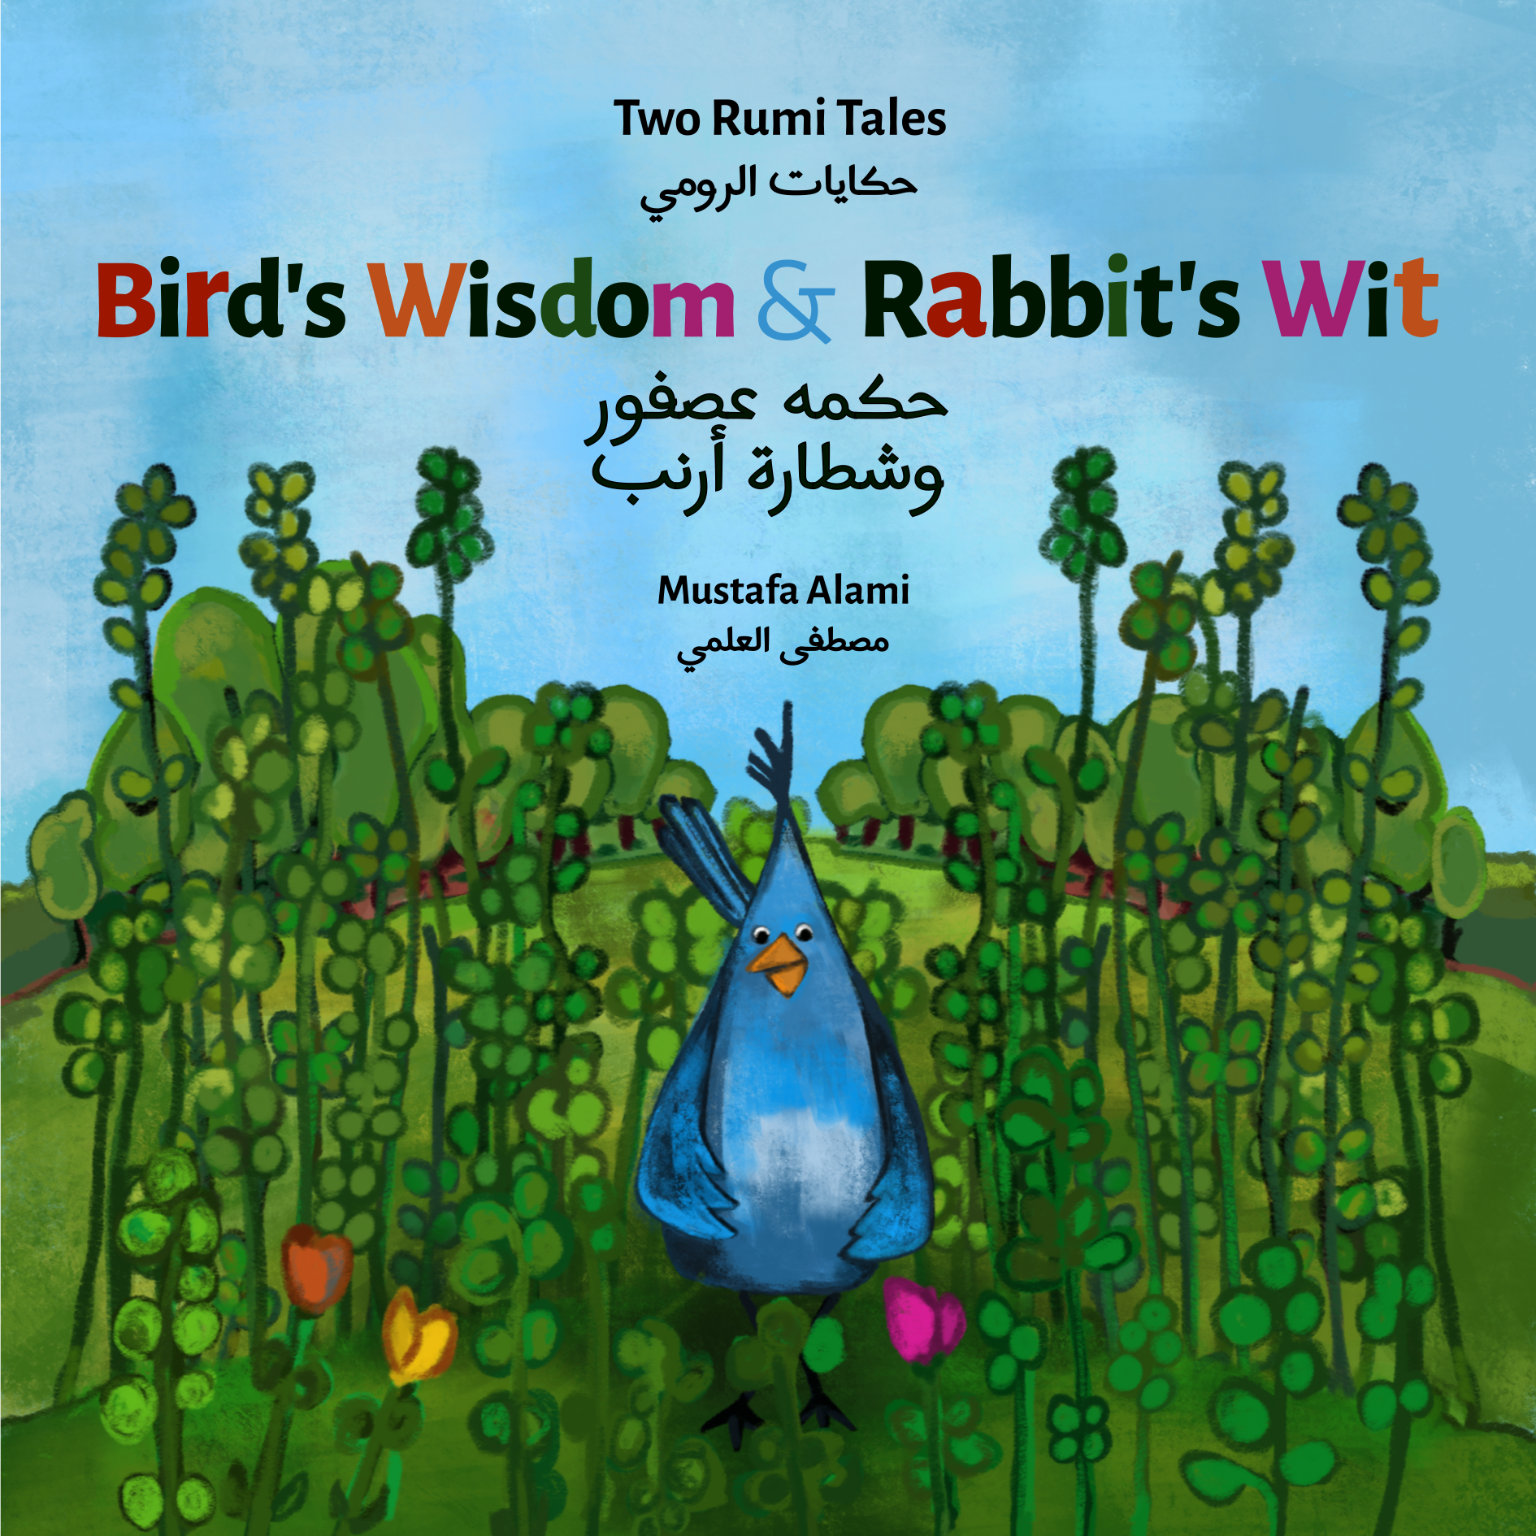 Bird's Wisdom and Rabbit's Wit title in colorful typography.